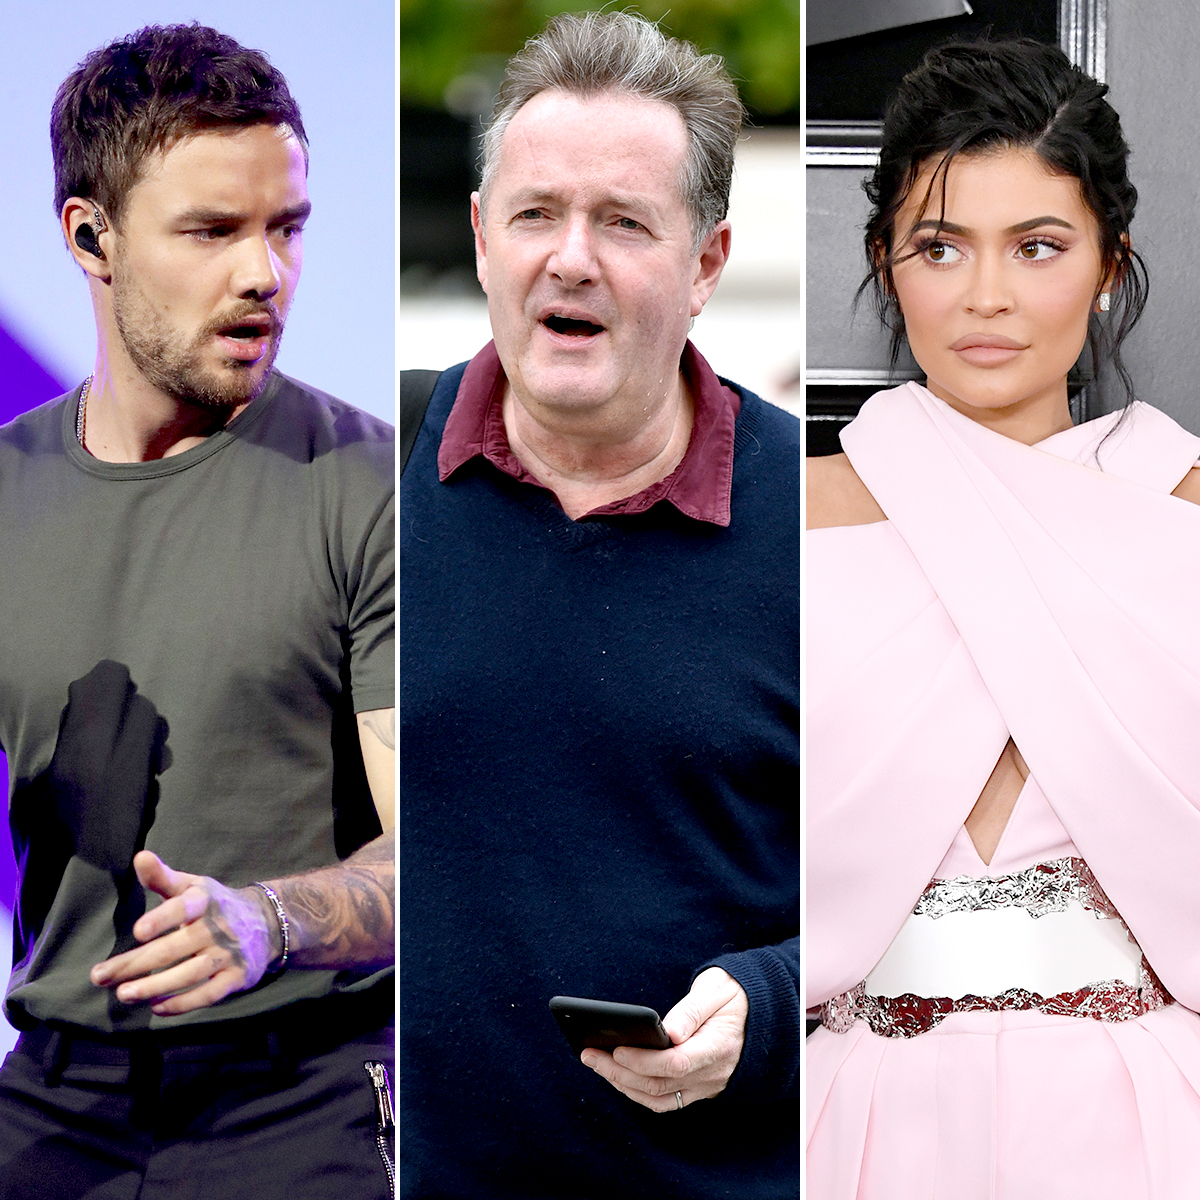 Liam Payne Piers Morgan Get Into Twitter Feud Over Kylie Jenner